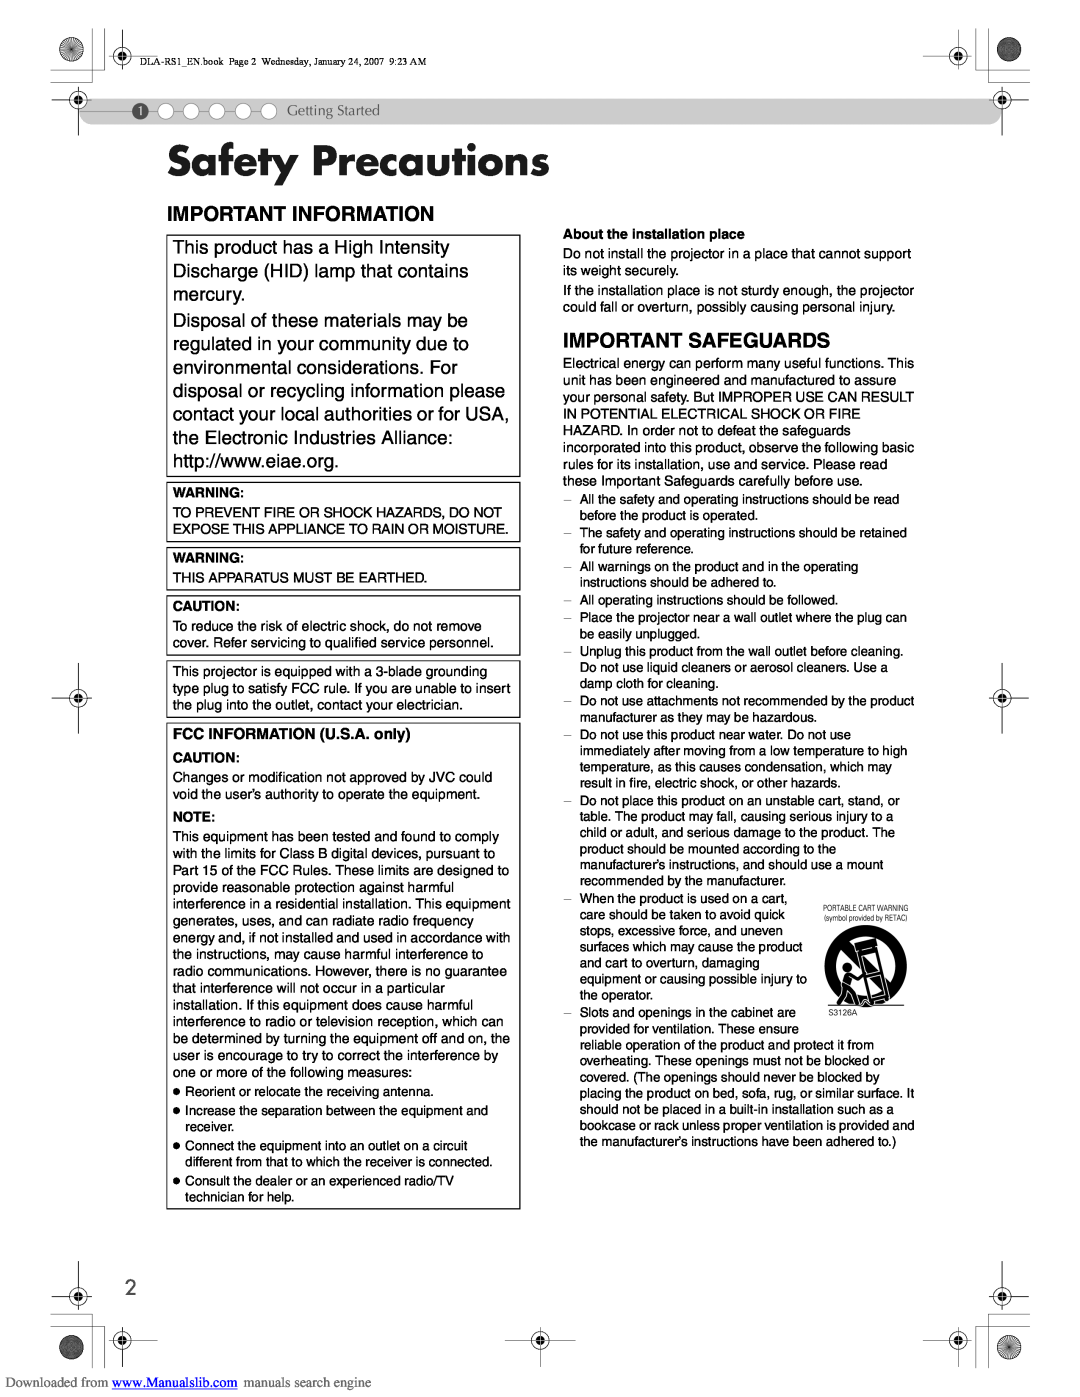 JVC DLA-RS1 manual Safety Precautions, Important Information, Important Safeguards 